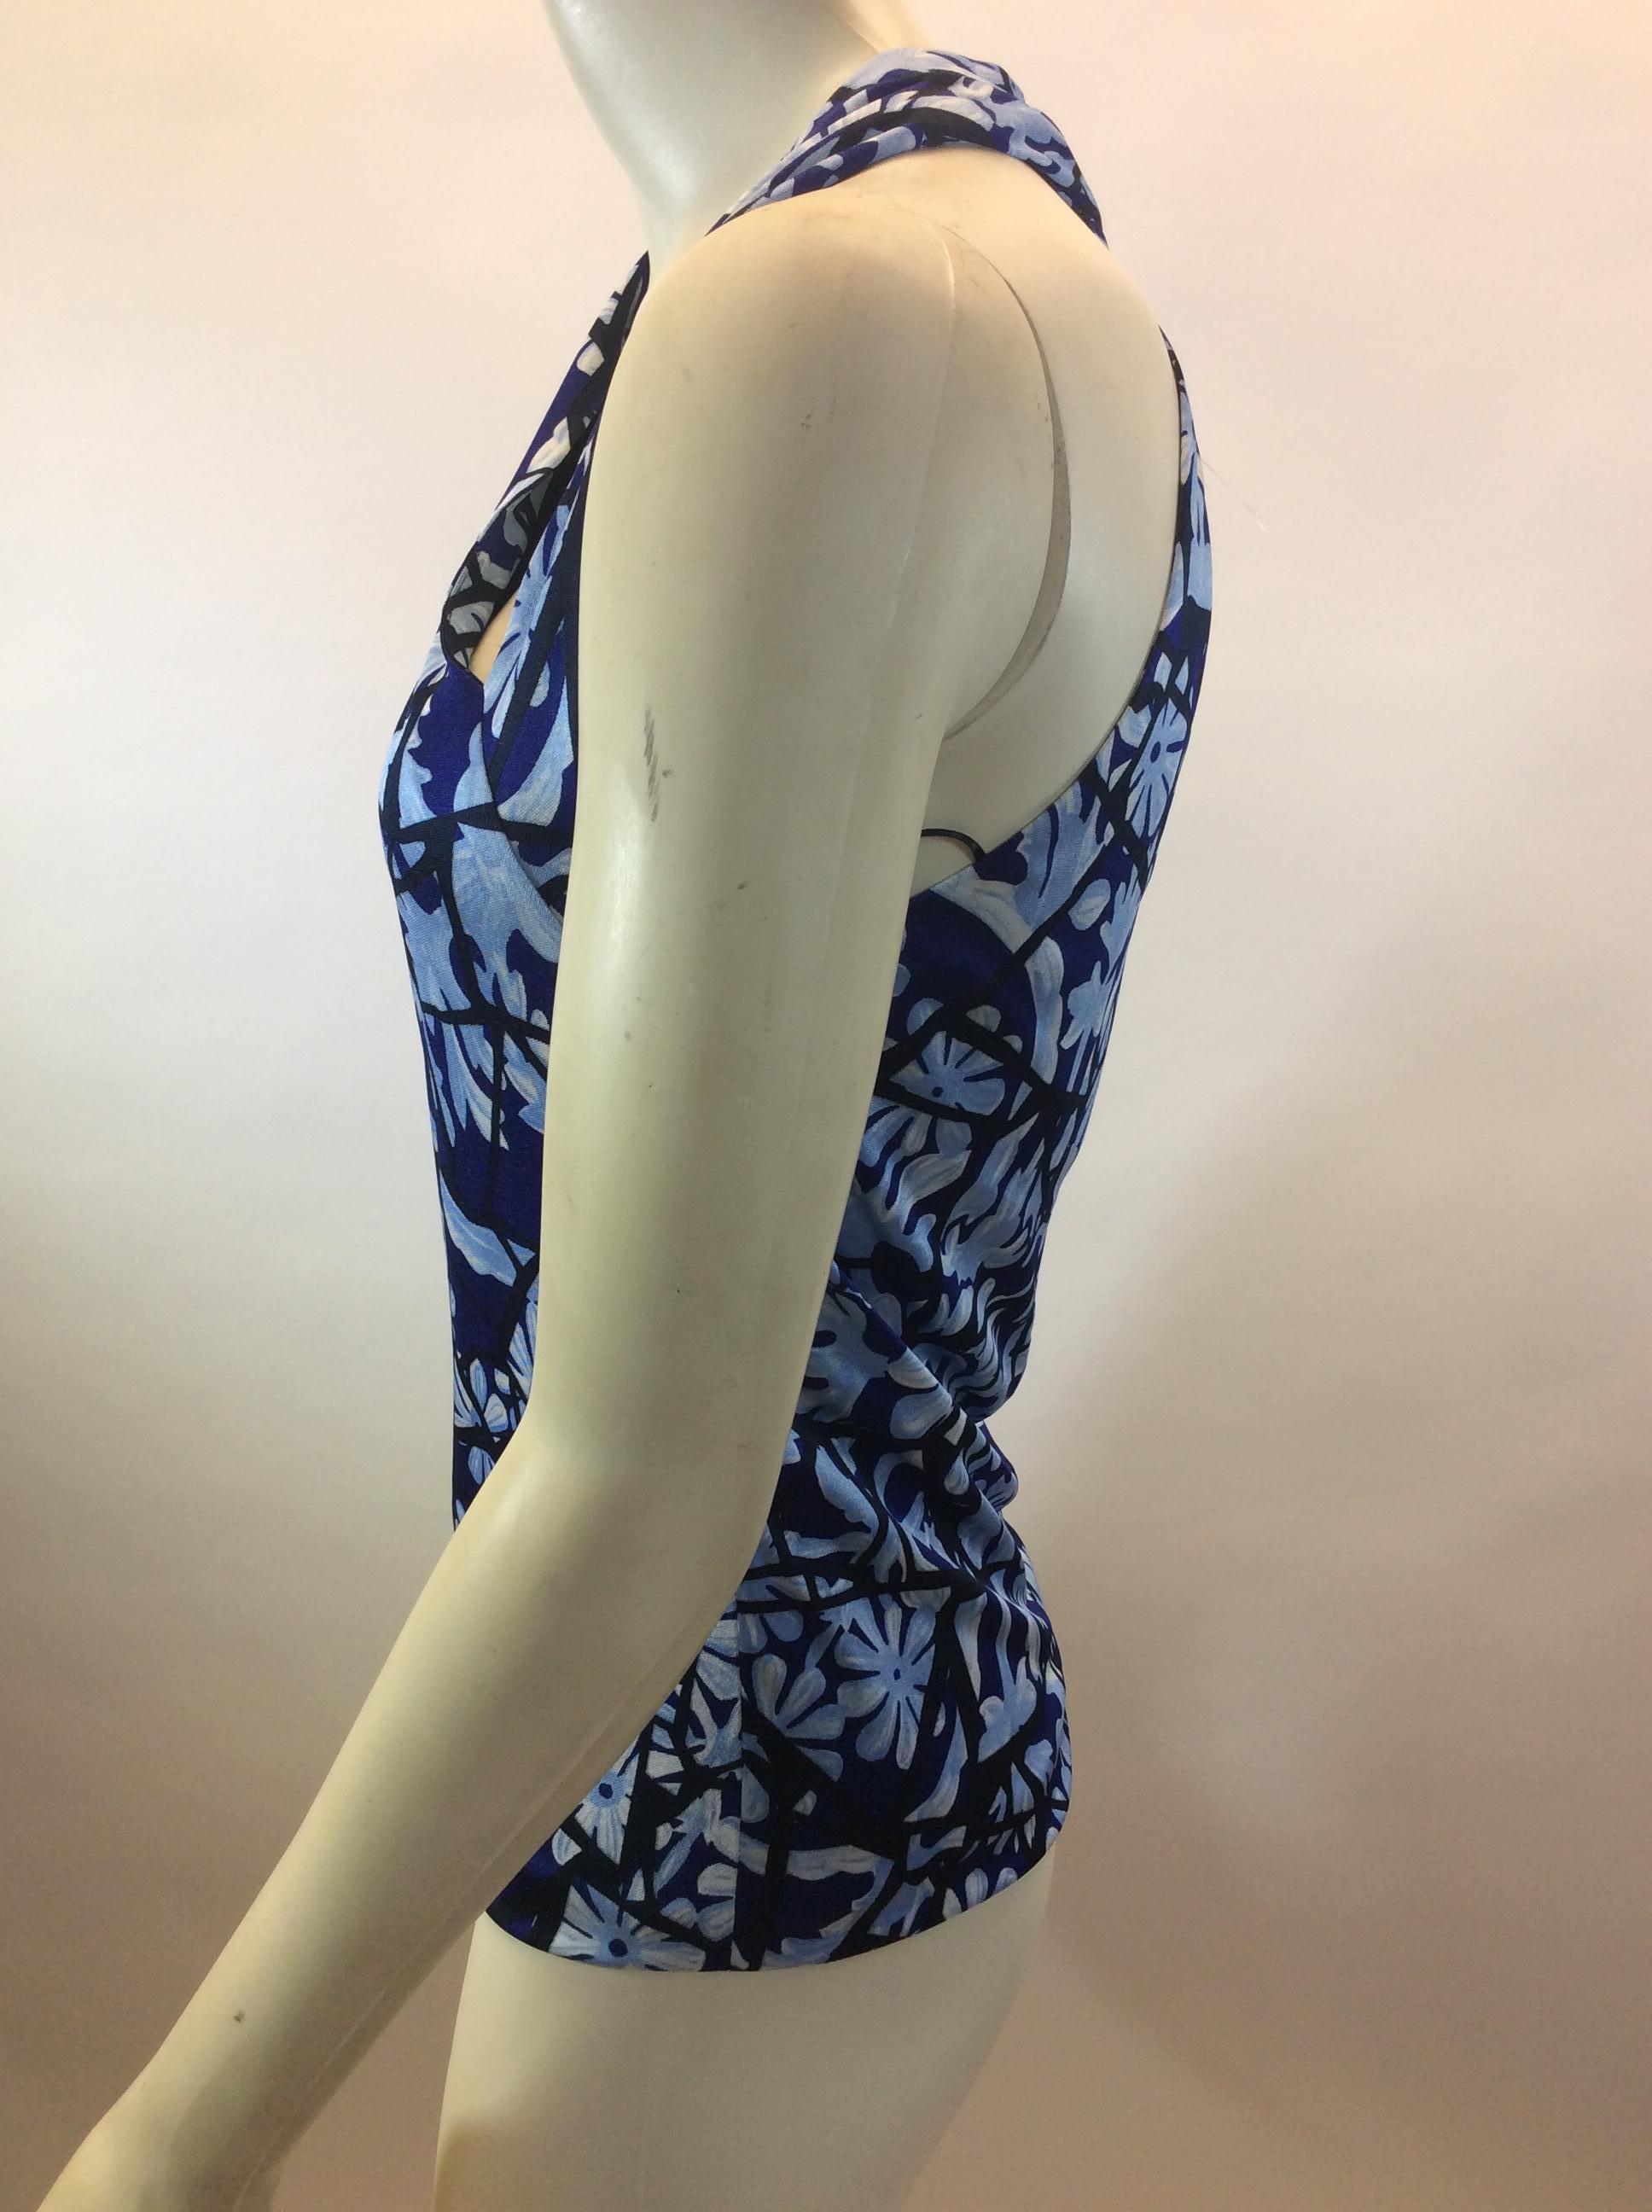 Gucci Blue Print Sleeveless Blouse
$265
Made in Italy
60% viscose, 40% silk
Size 38
Length 22